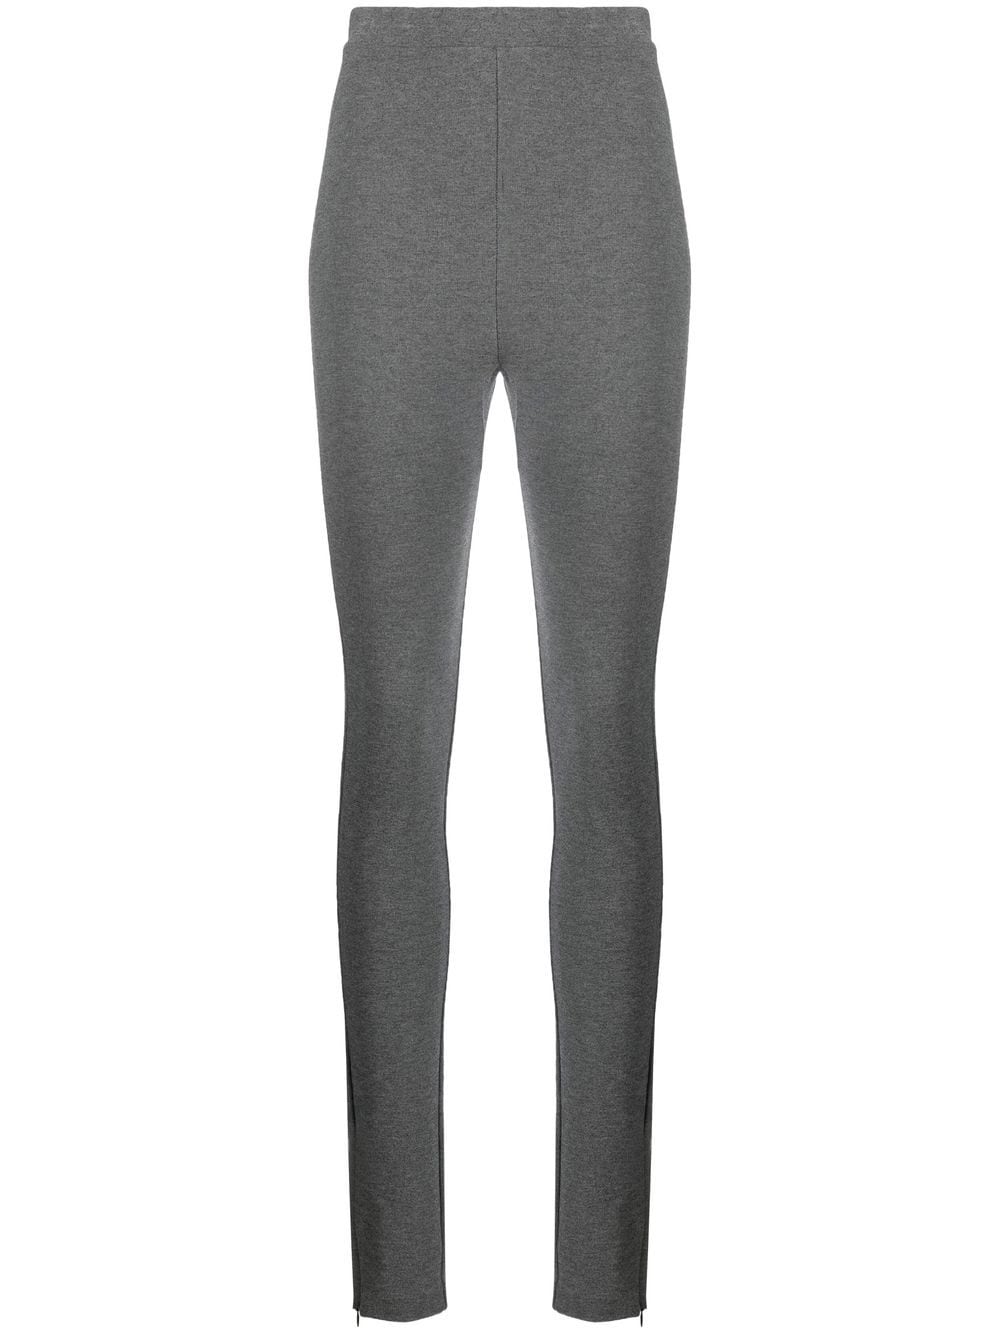 TOTEME ankle-zip high-waisted leggings - Grey von TOTEME